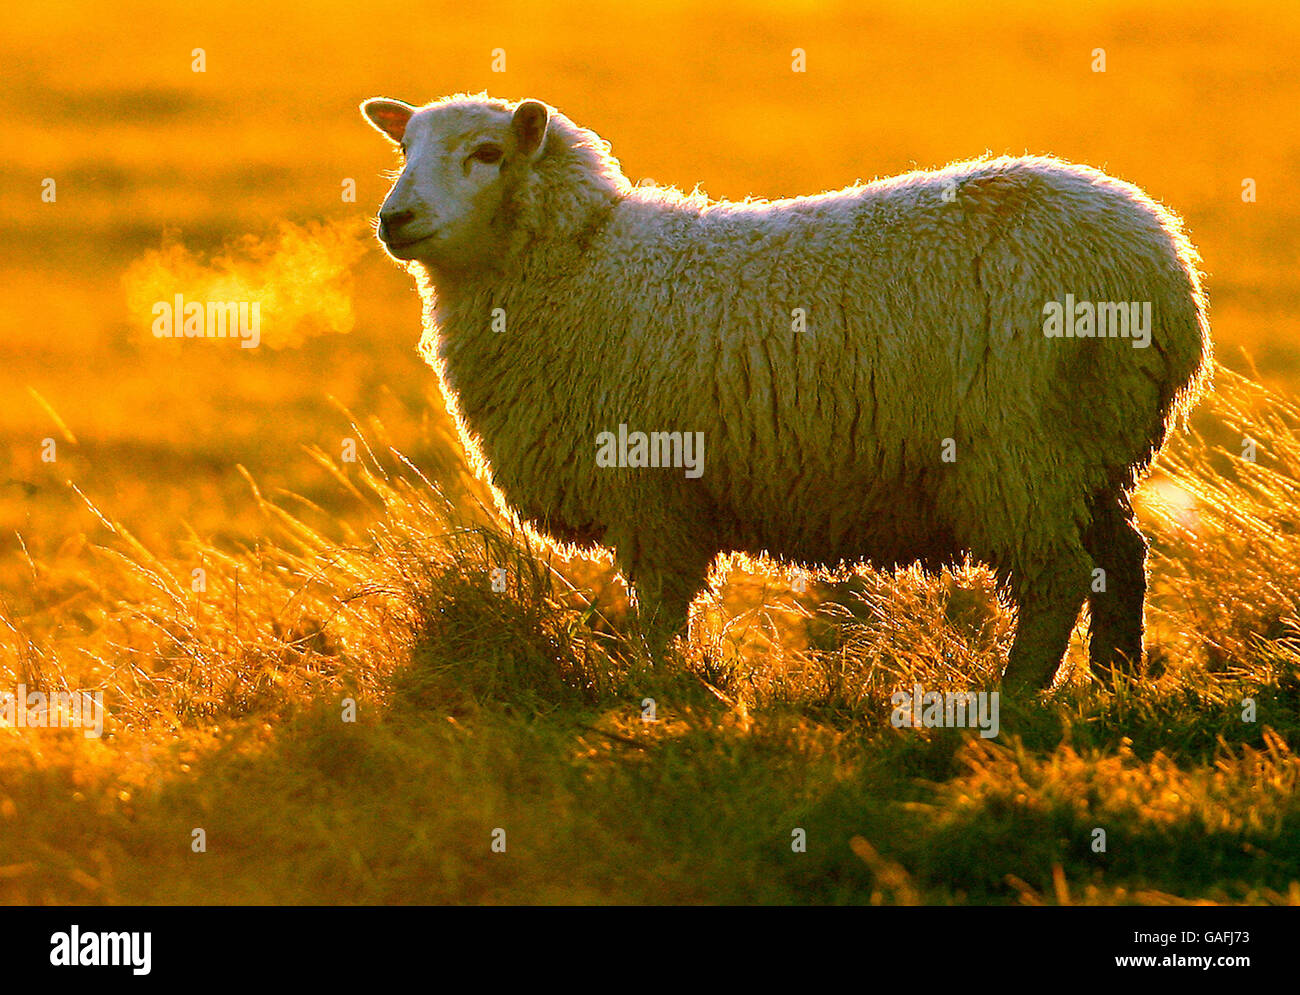 A sheep at sunset in a field near Charlwood, near Gatwick airport, in West Sussex. Stock Photo